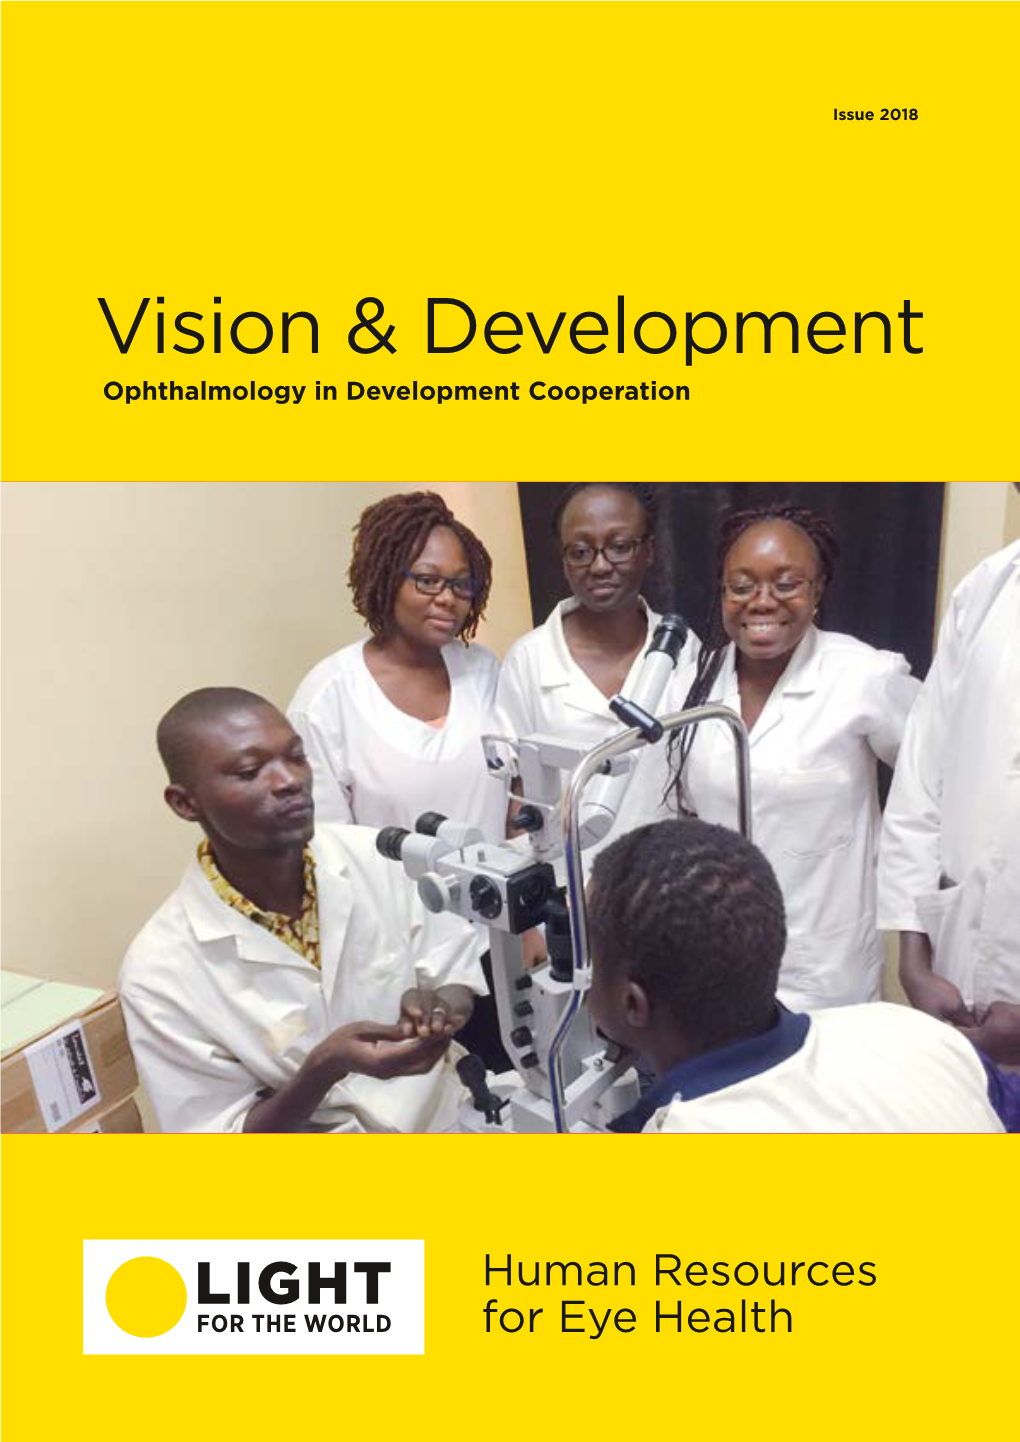 Vision & Development – Human Ressources for Eye Health